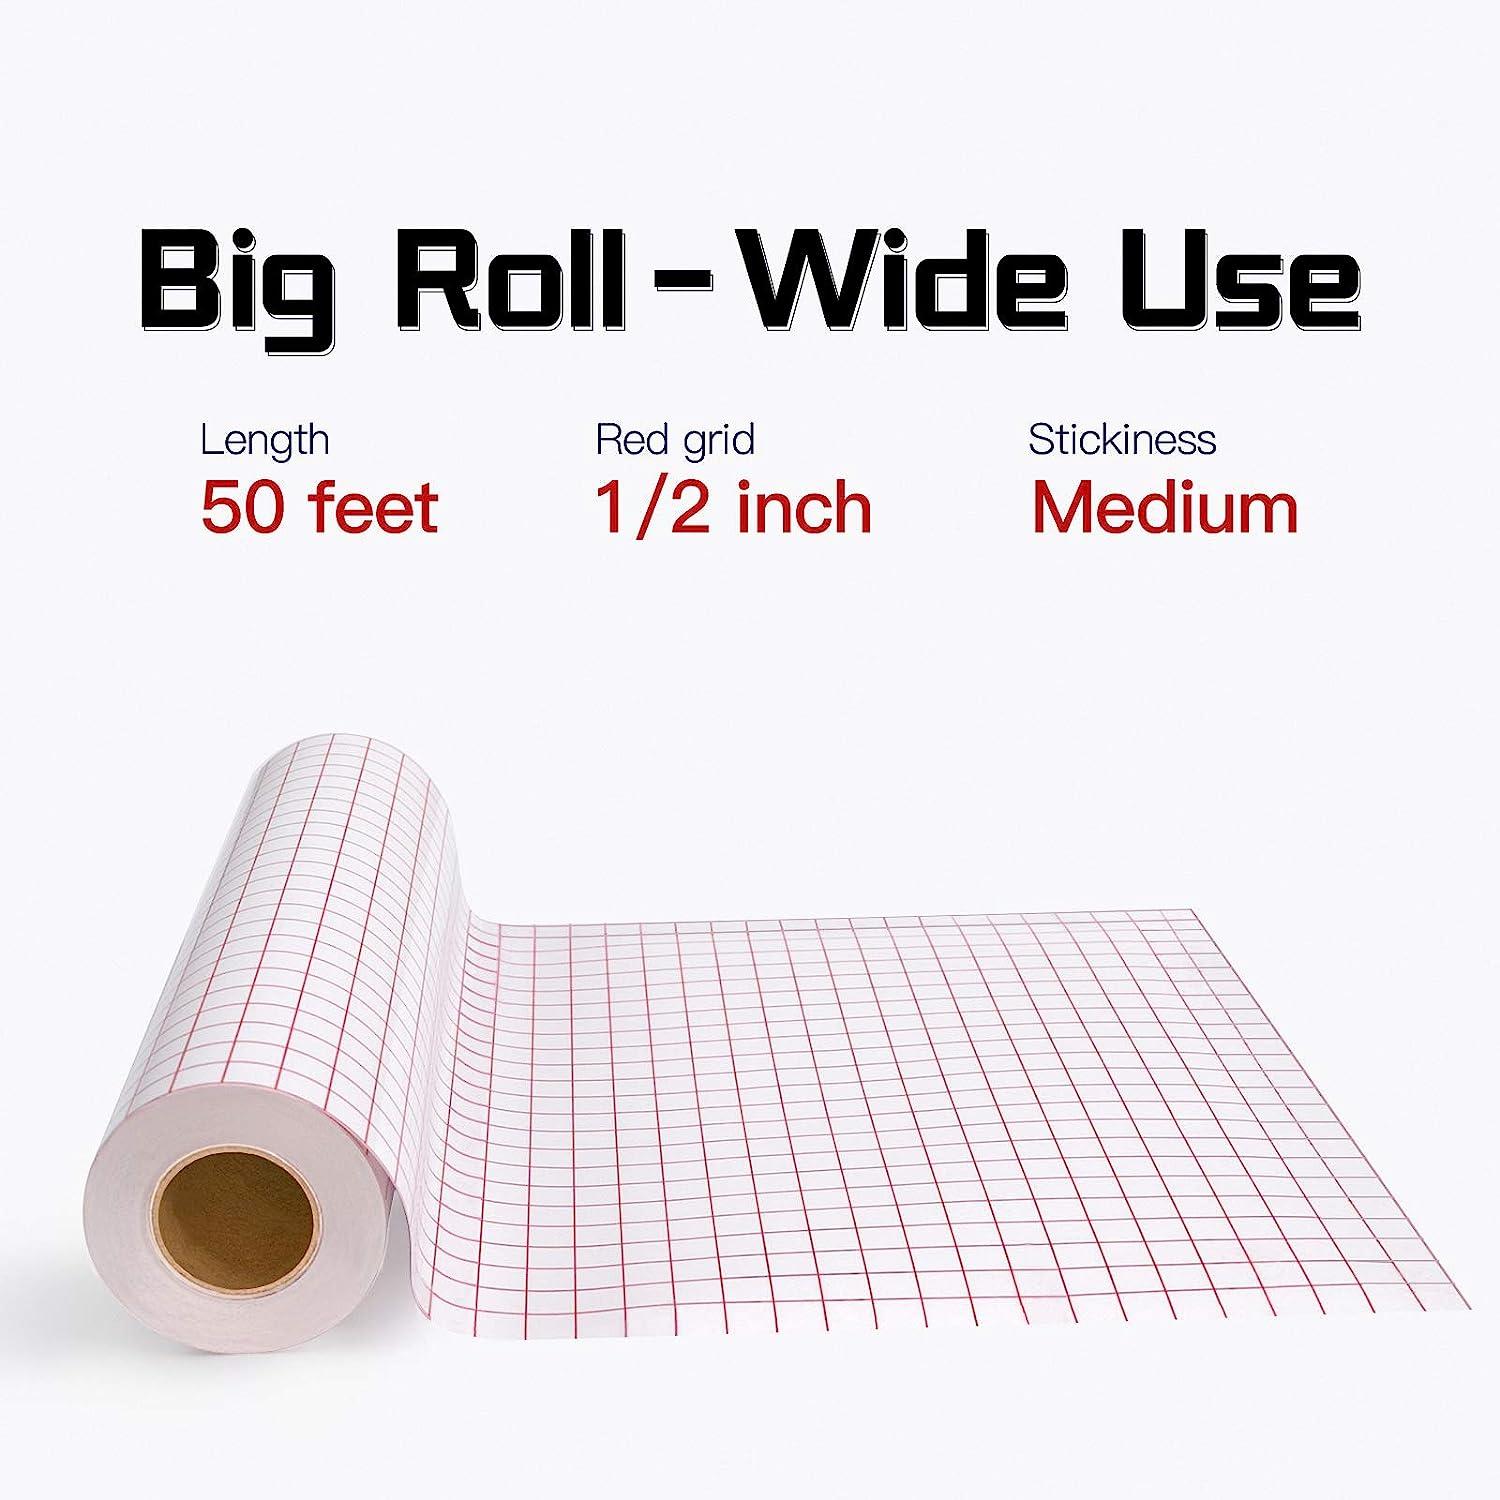 Red-Line Application Tape Roll - 12 x 50 yds.